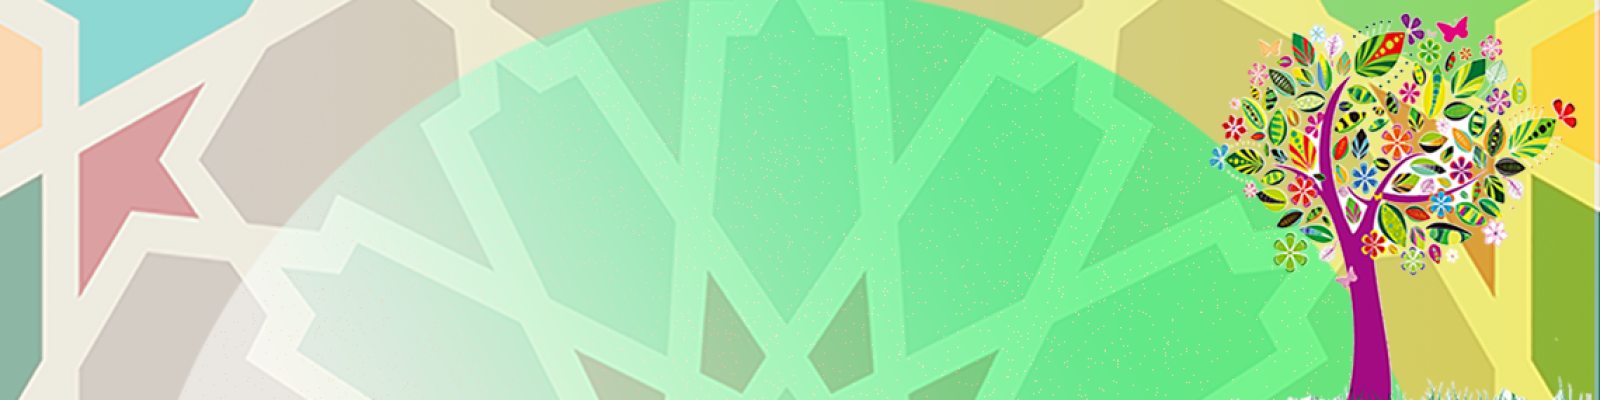 cropped-Arts-Banner-3.png